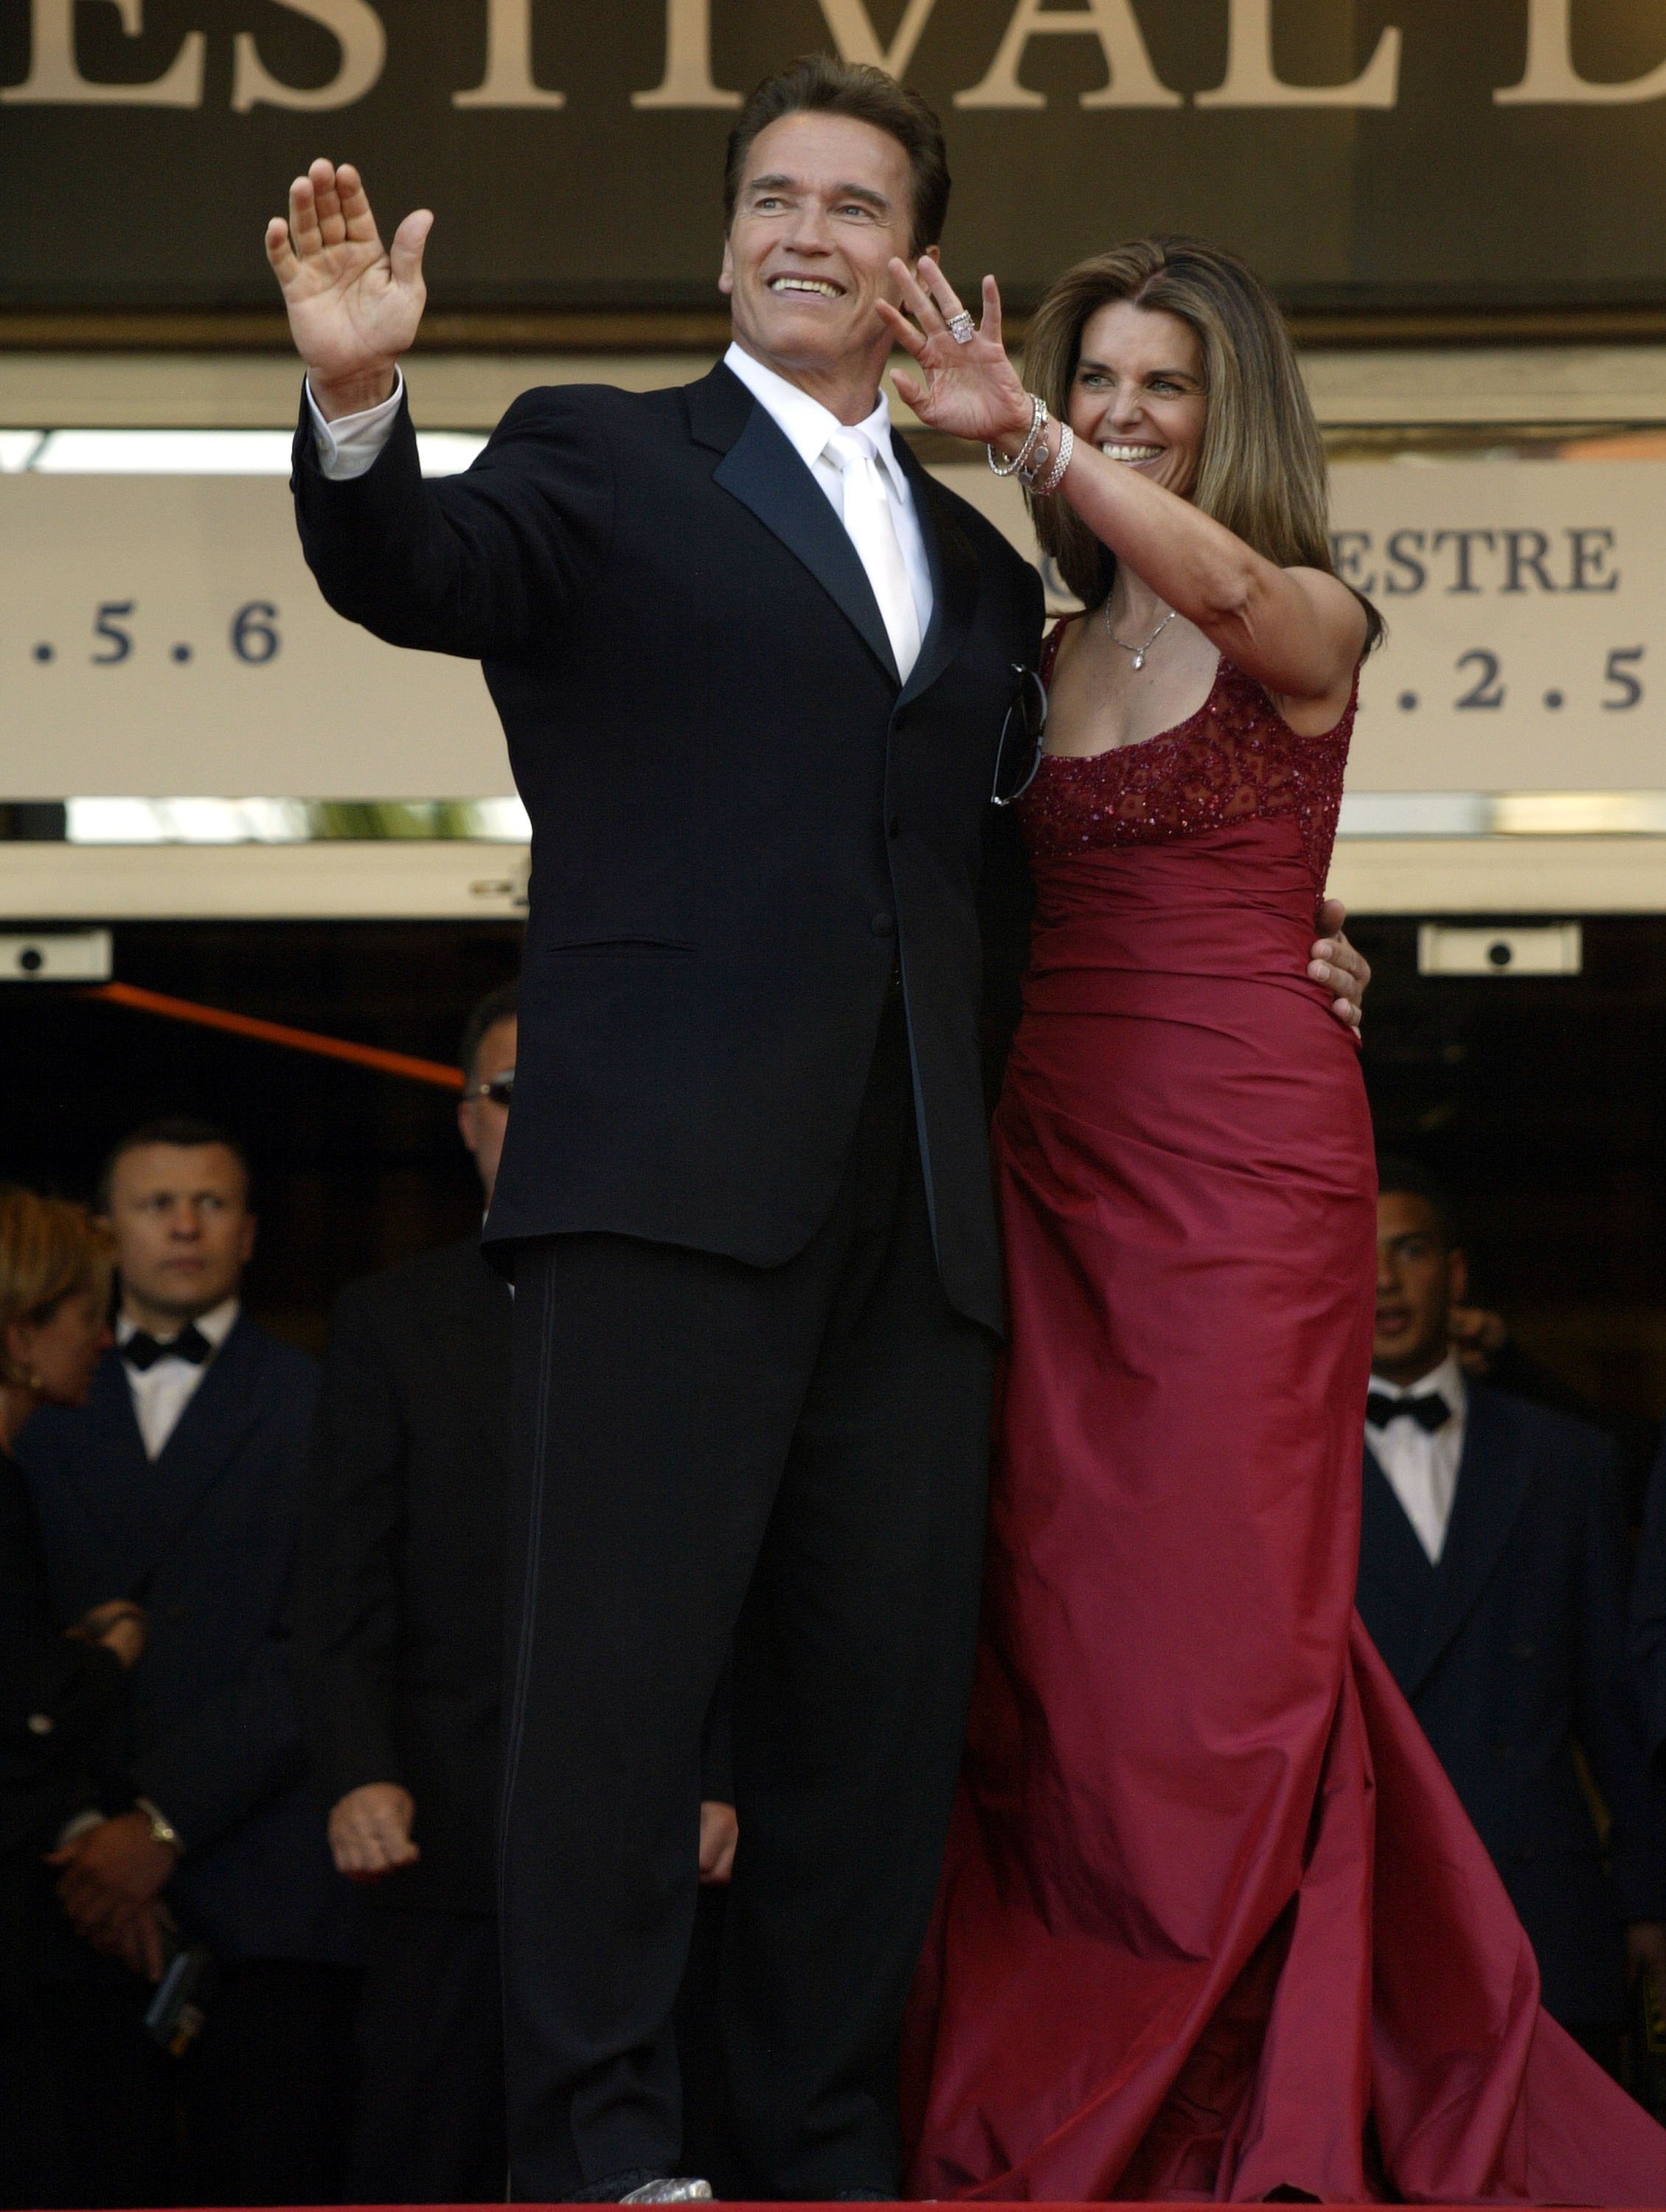 Arnold Schwarzenegger and Maria Shriver during 2003 Cannes Film Festival - "Les Egares" Premiere at Palais Des Festival in Cannes, France on May 16, 2003 | Source: Getty images 